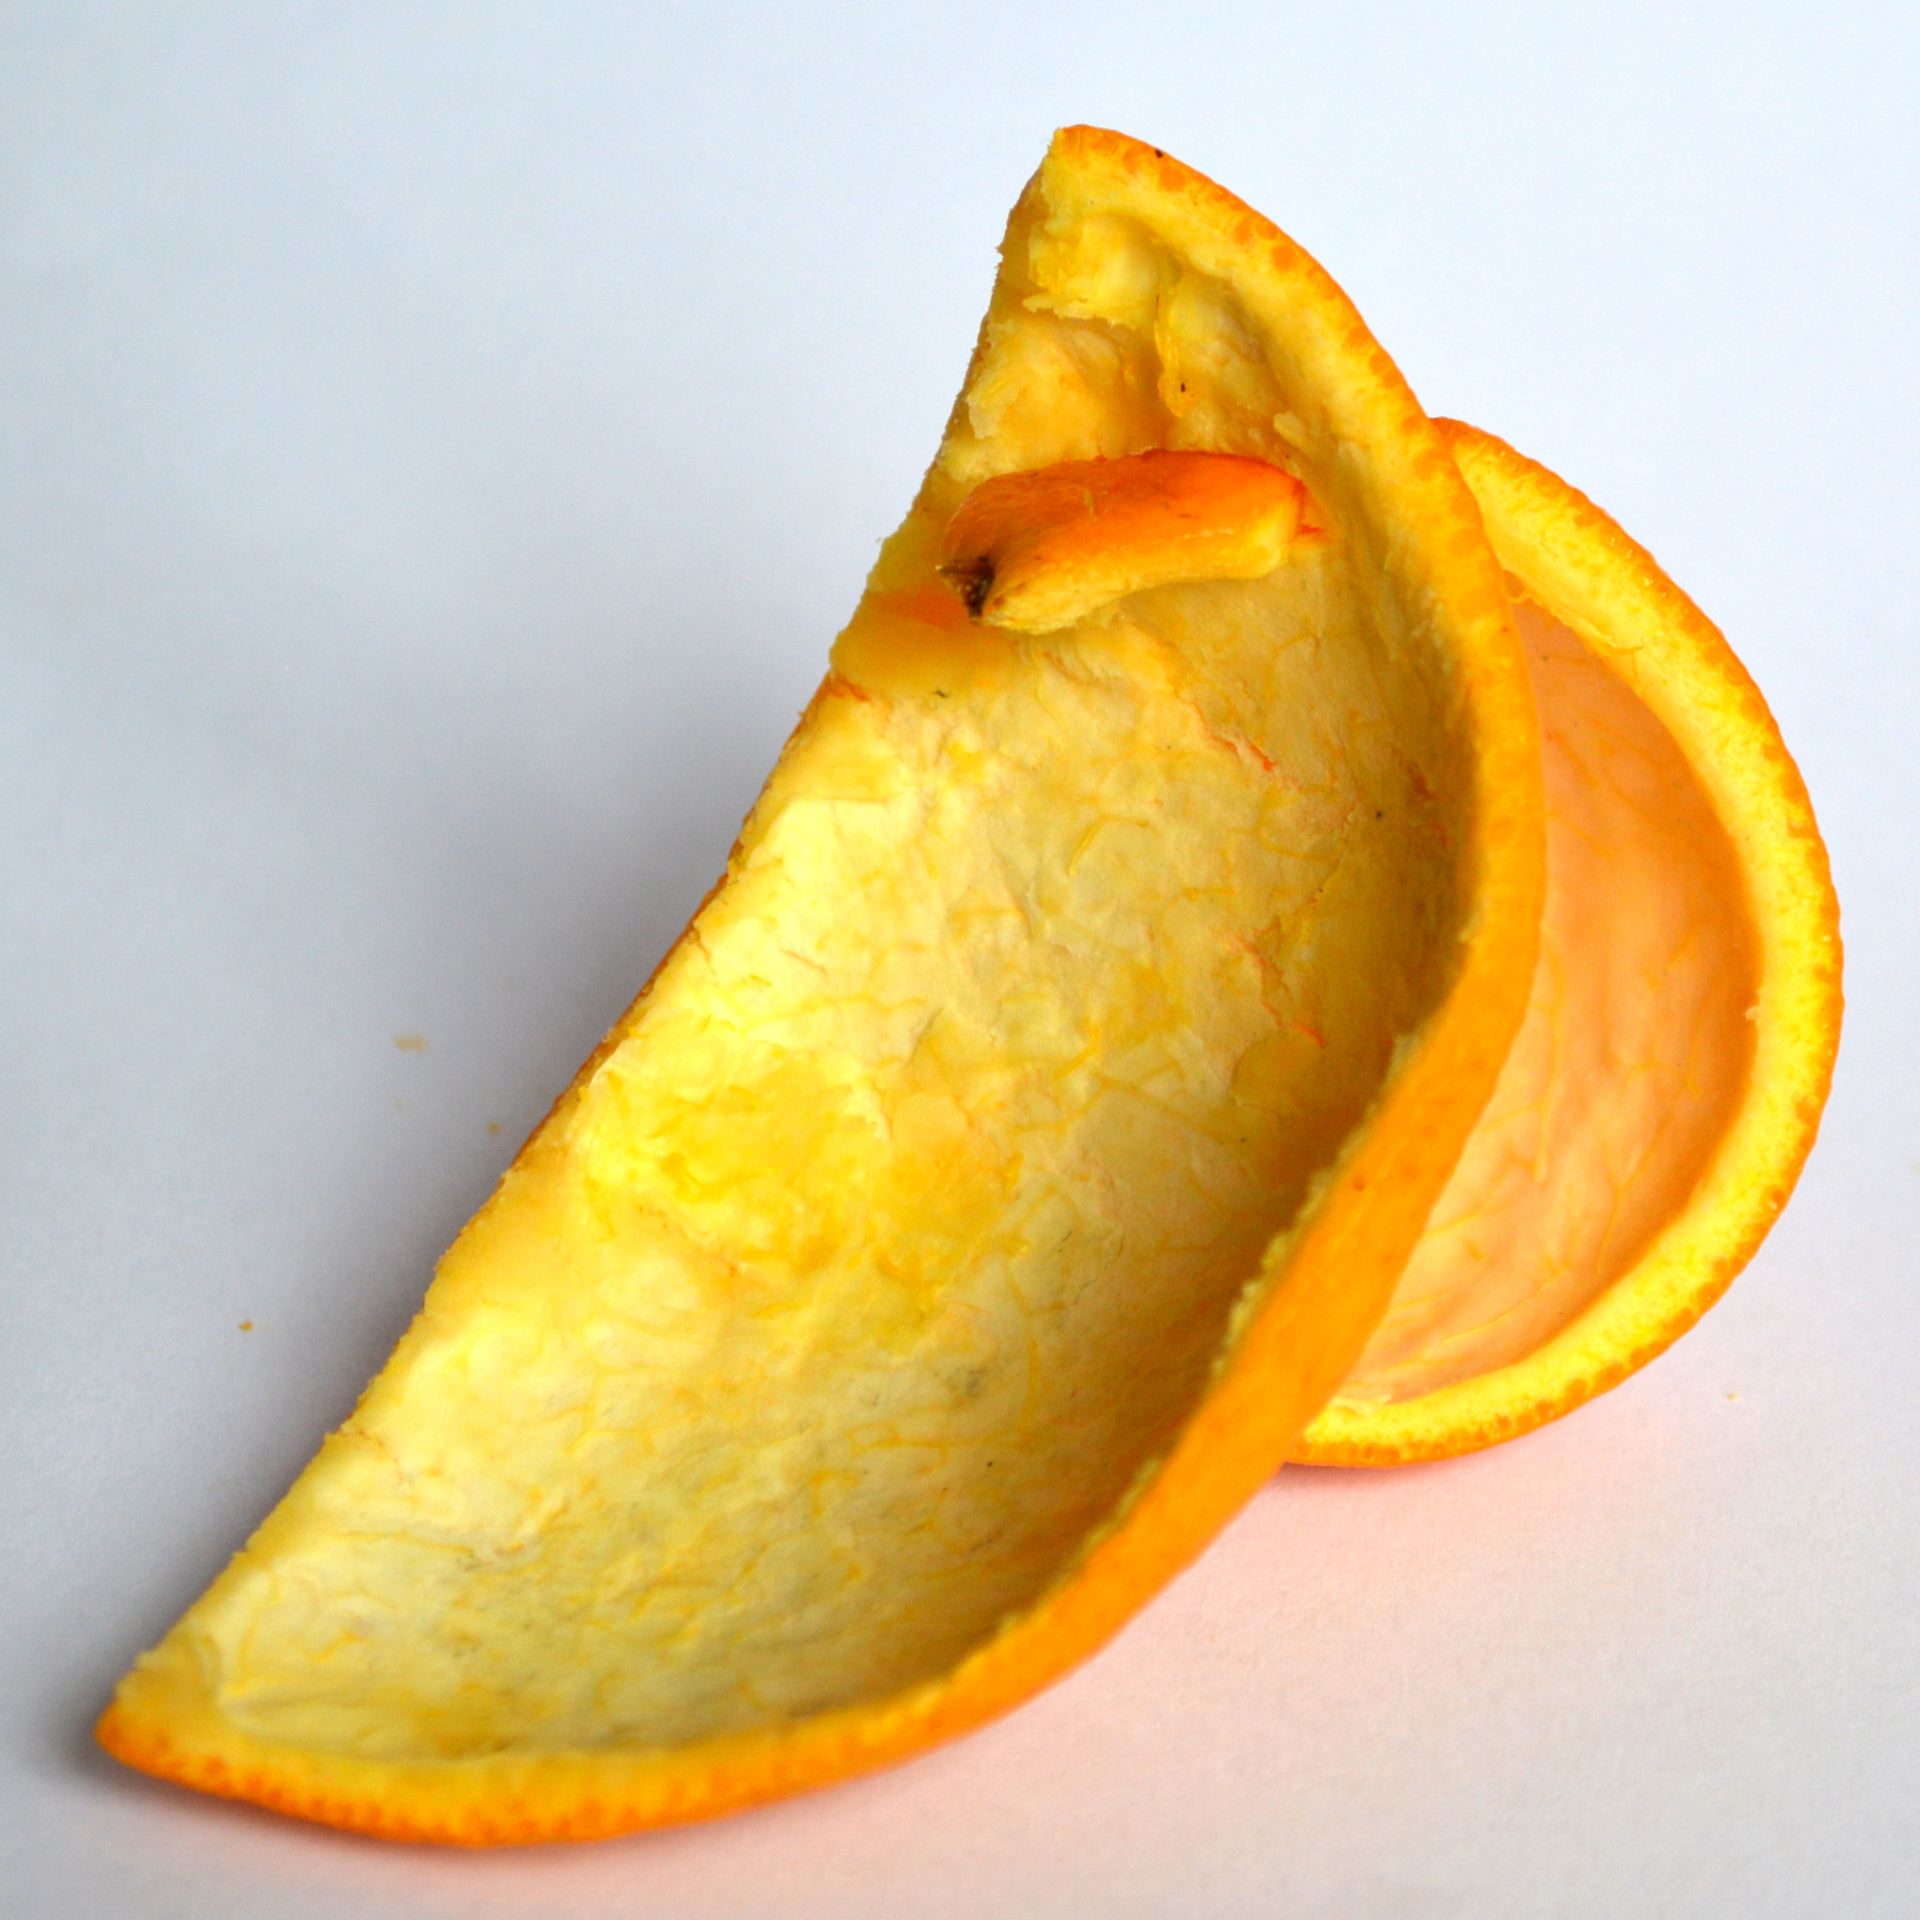 An image of an abstract sculpture made from orange peel.